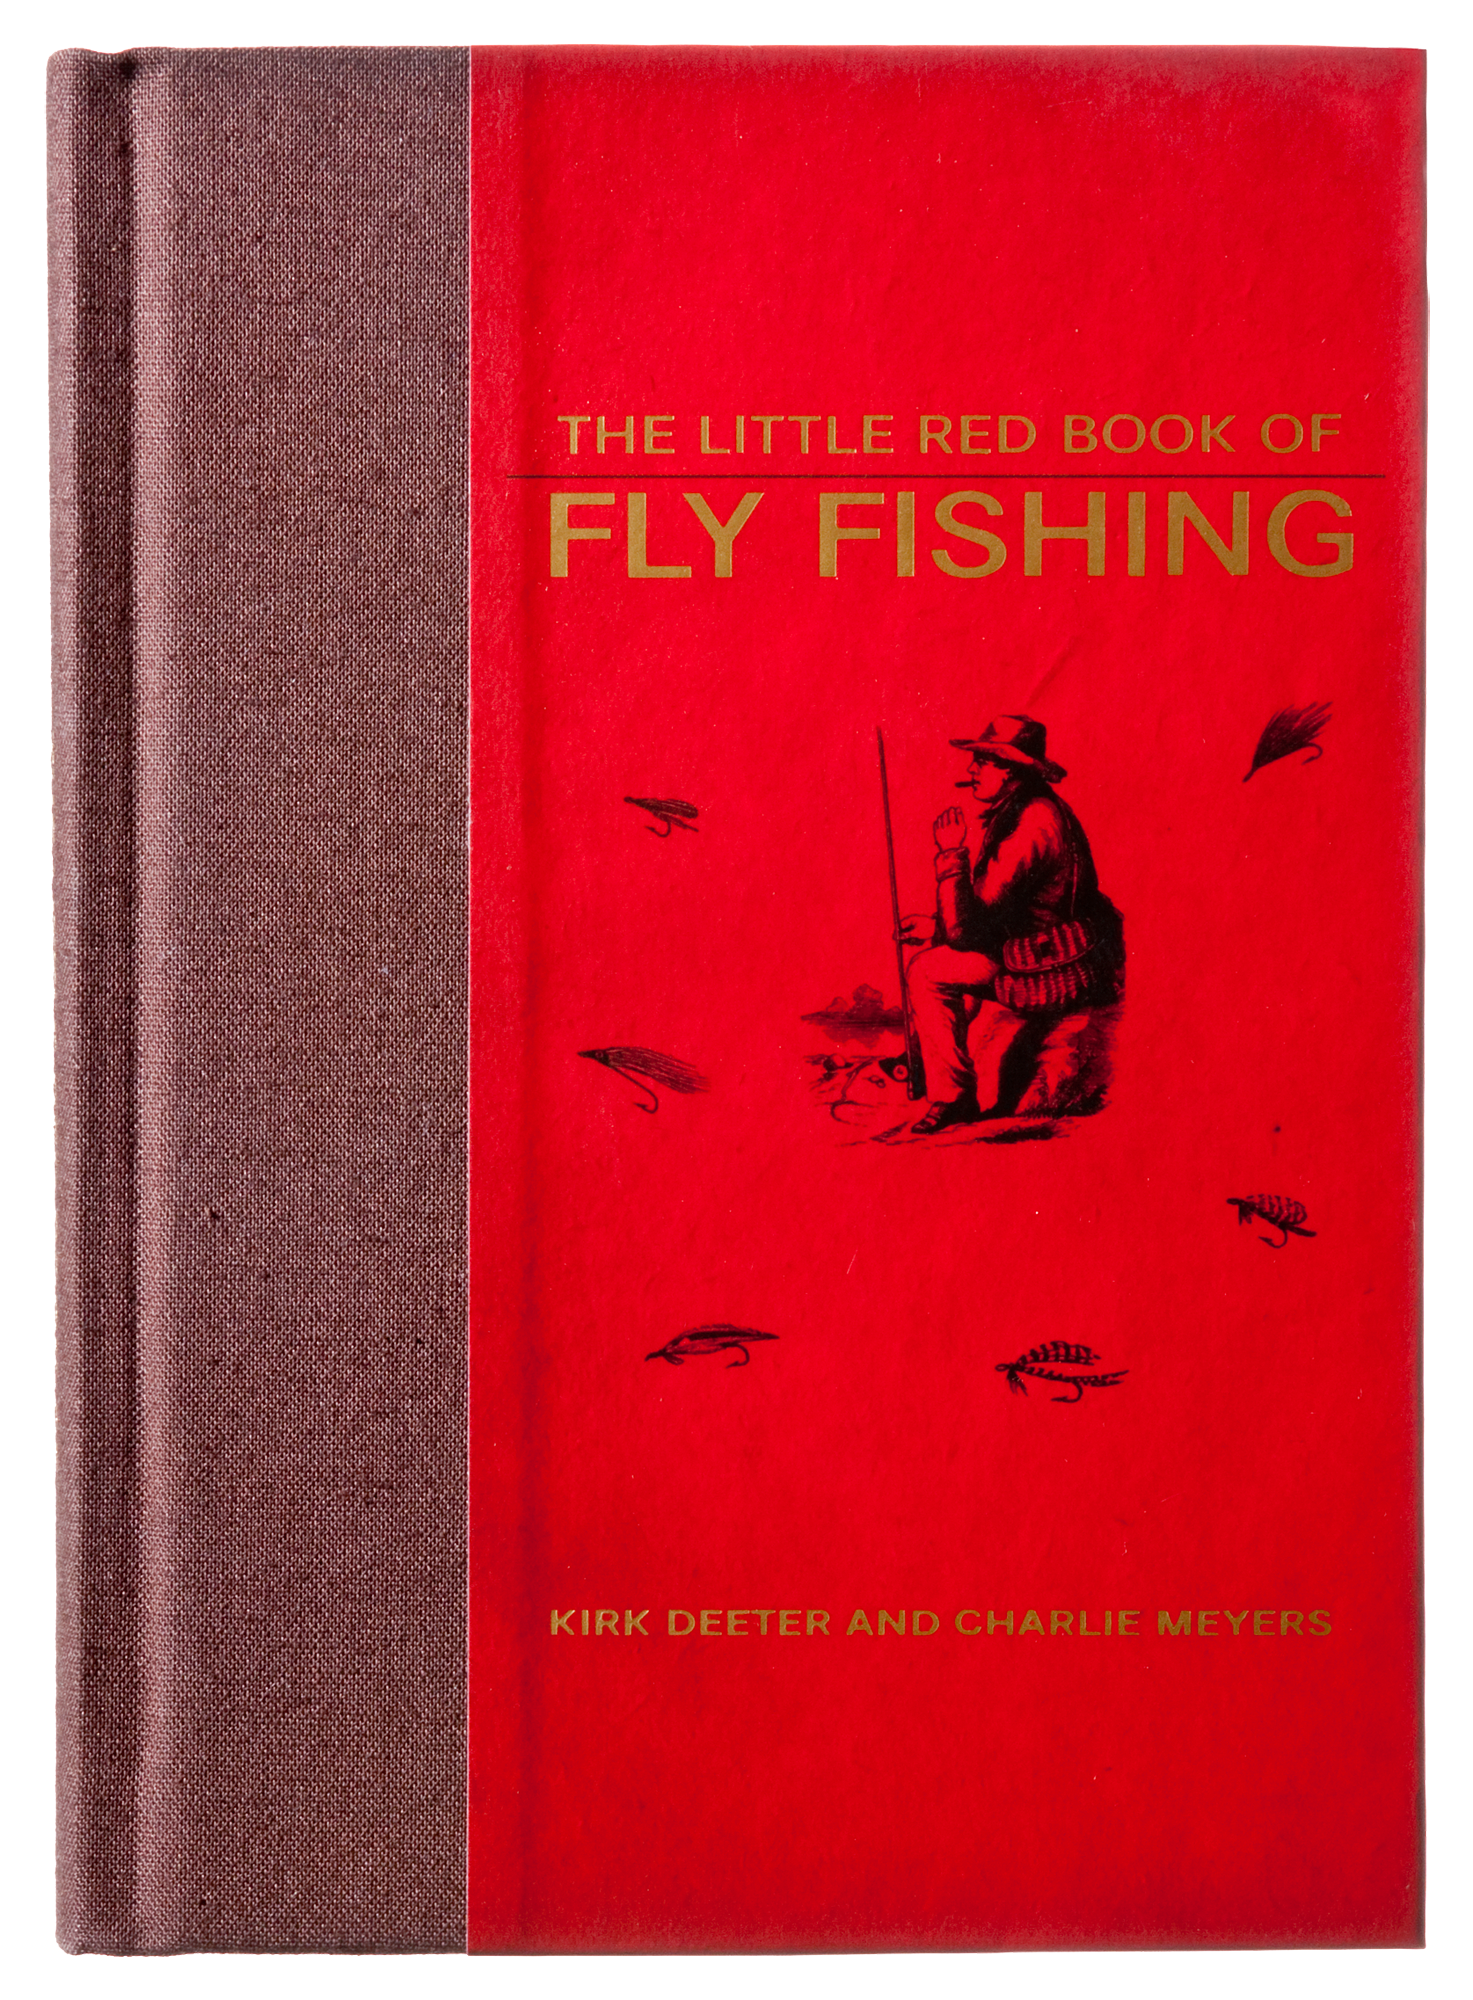 The Little Red Book of Fly Fishing - Book by Kirk Deeter and Charlie Meyers